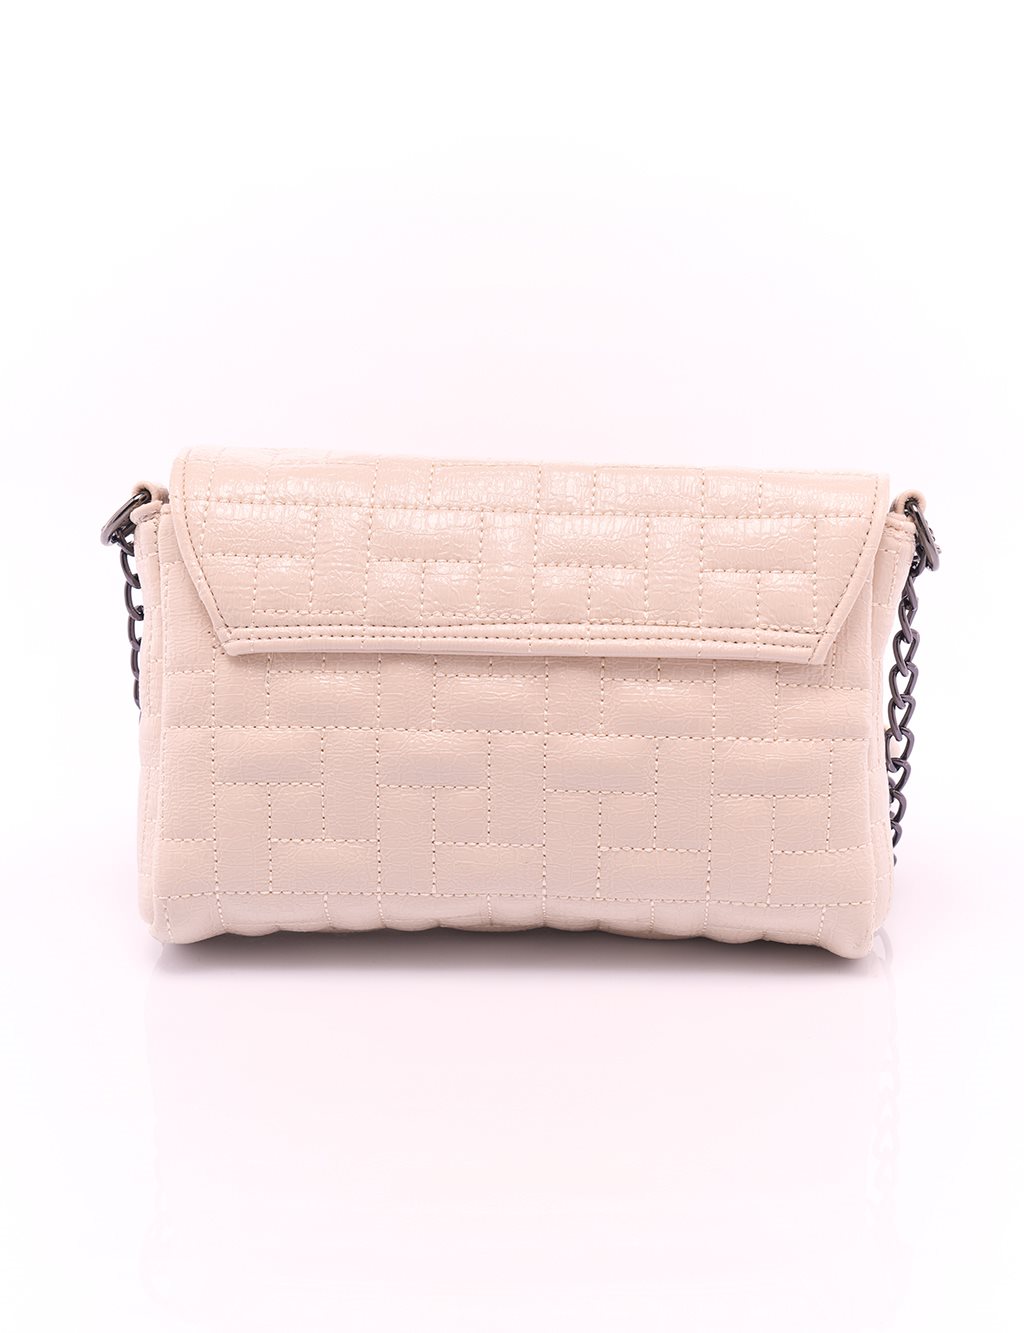 Croco Pattern Bag Cream with Cover